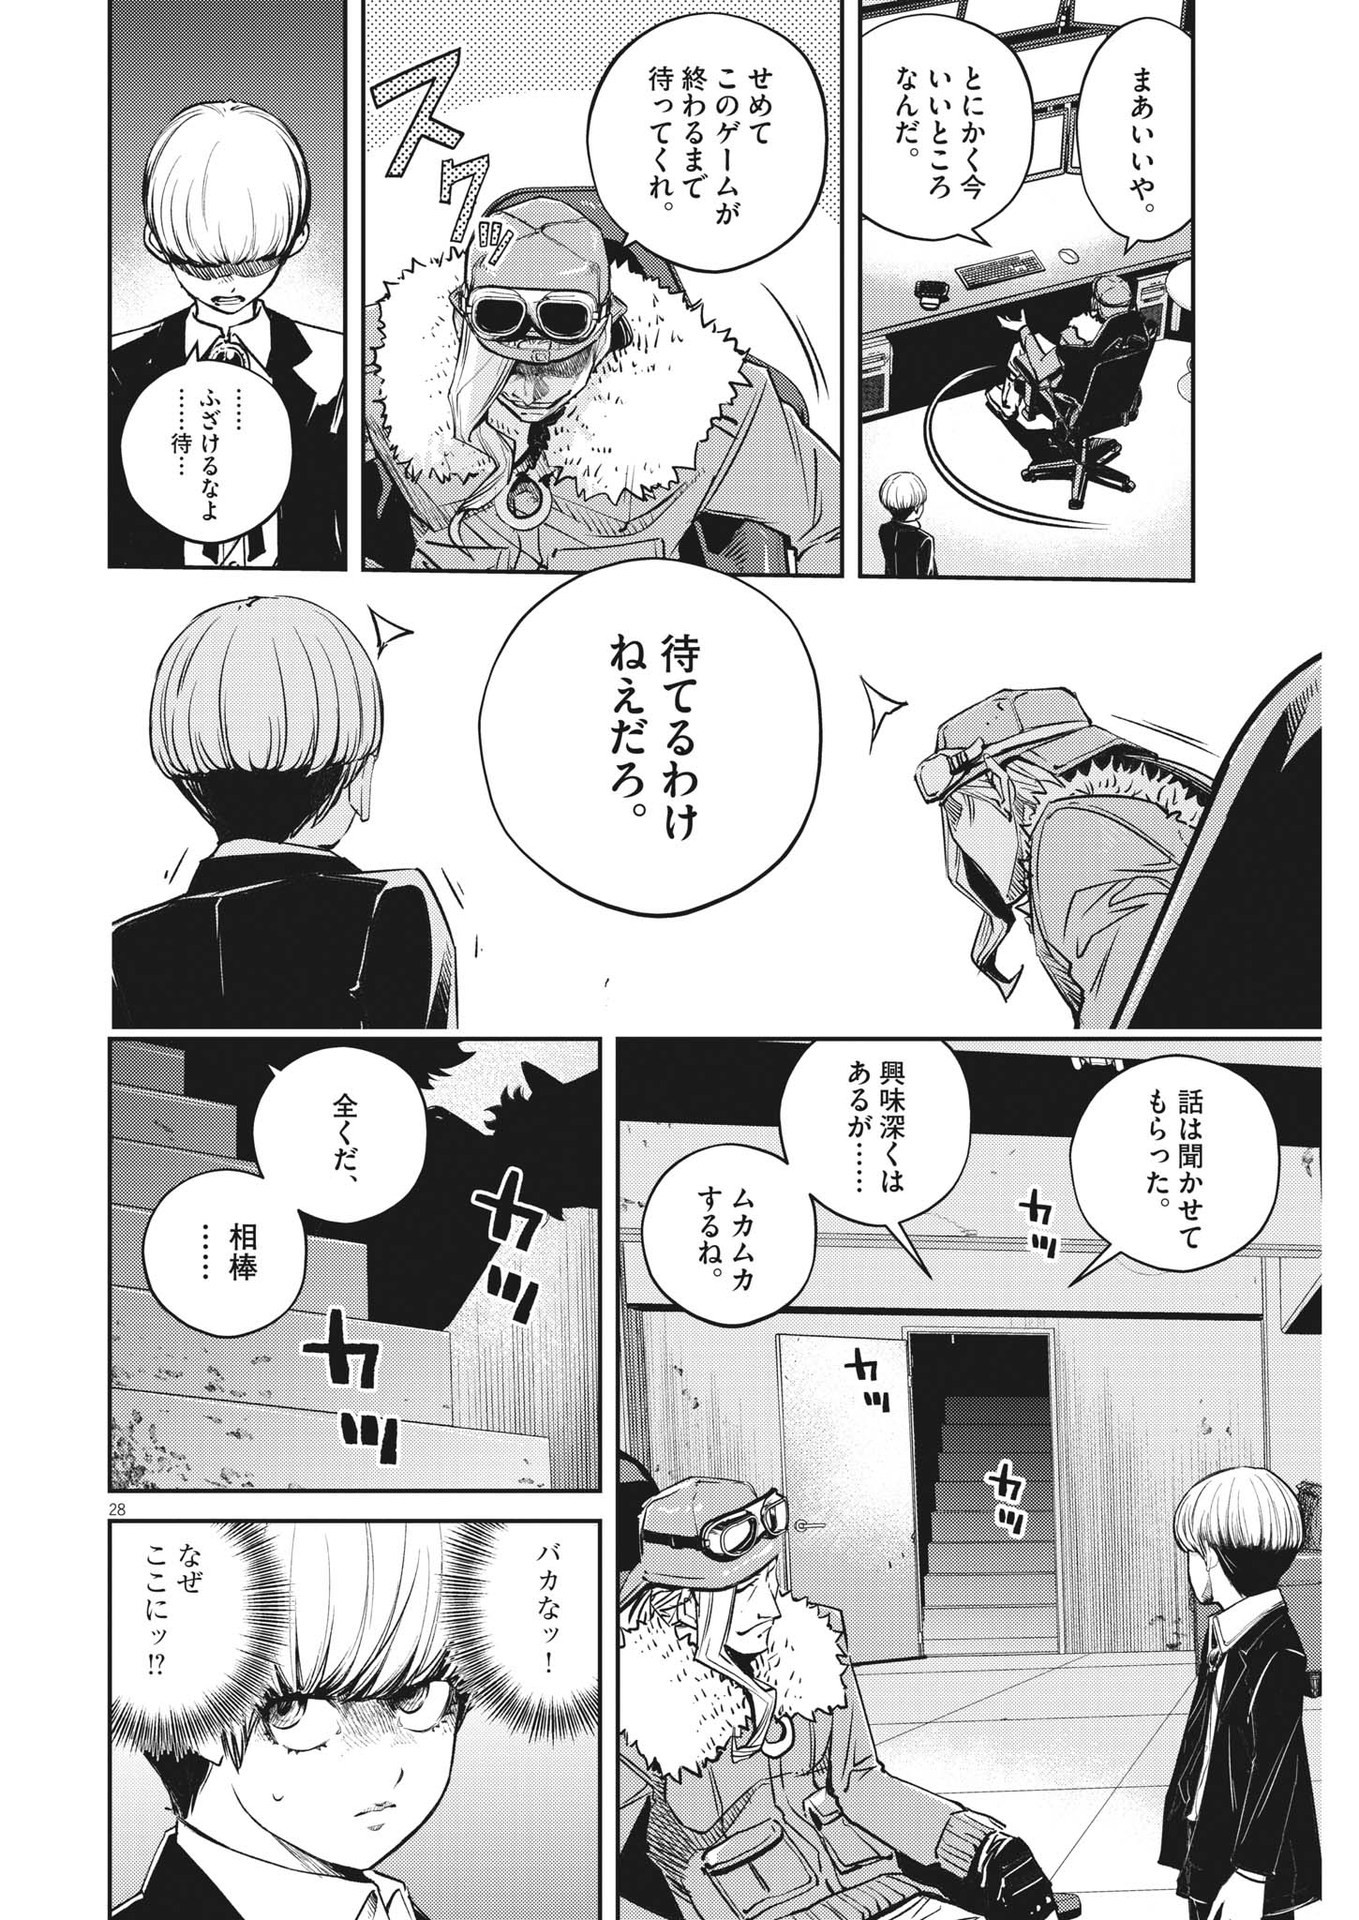 Kamen Rider W: Fuuto Tantei - Chapter 139 - Page 28